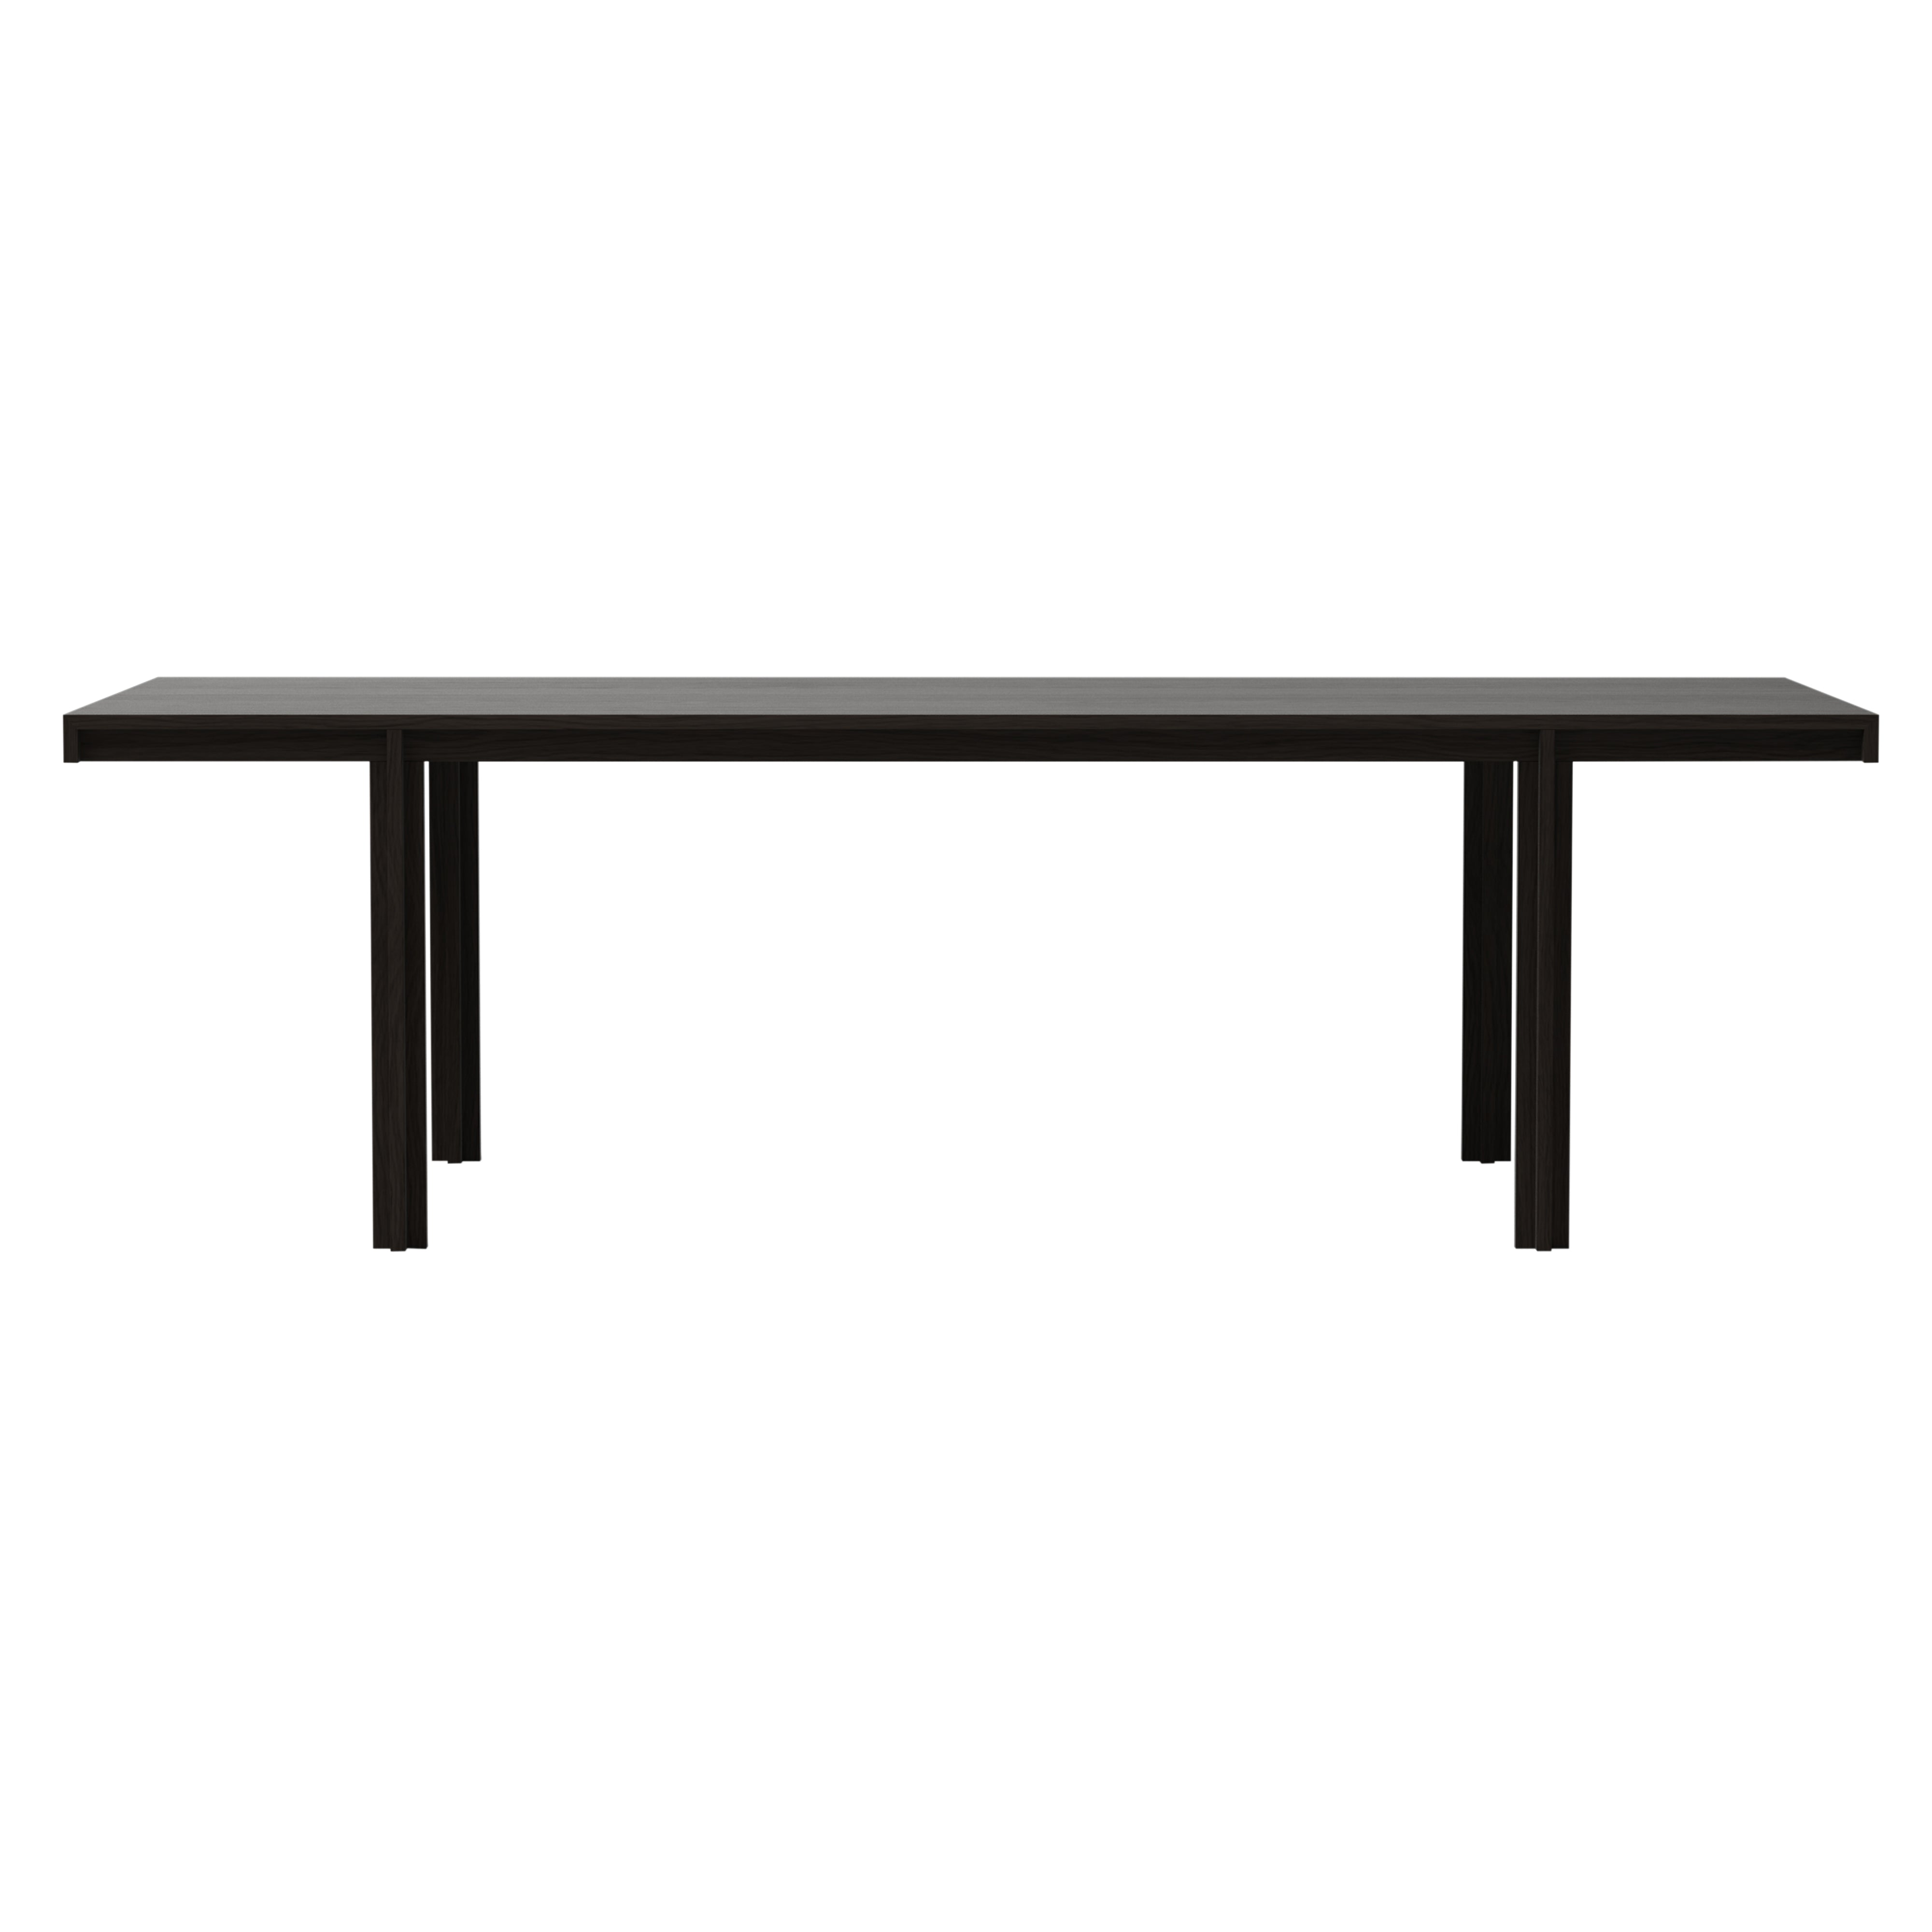 Principal Dining Table: Large - 110" + Smoked Stained Oak